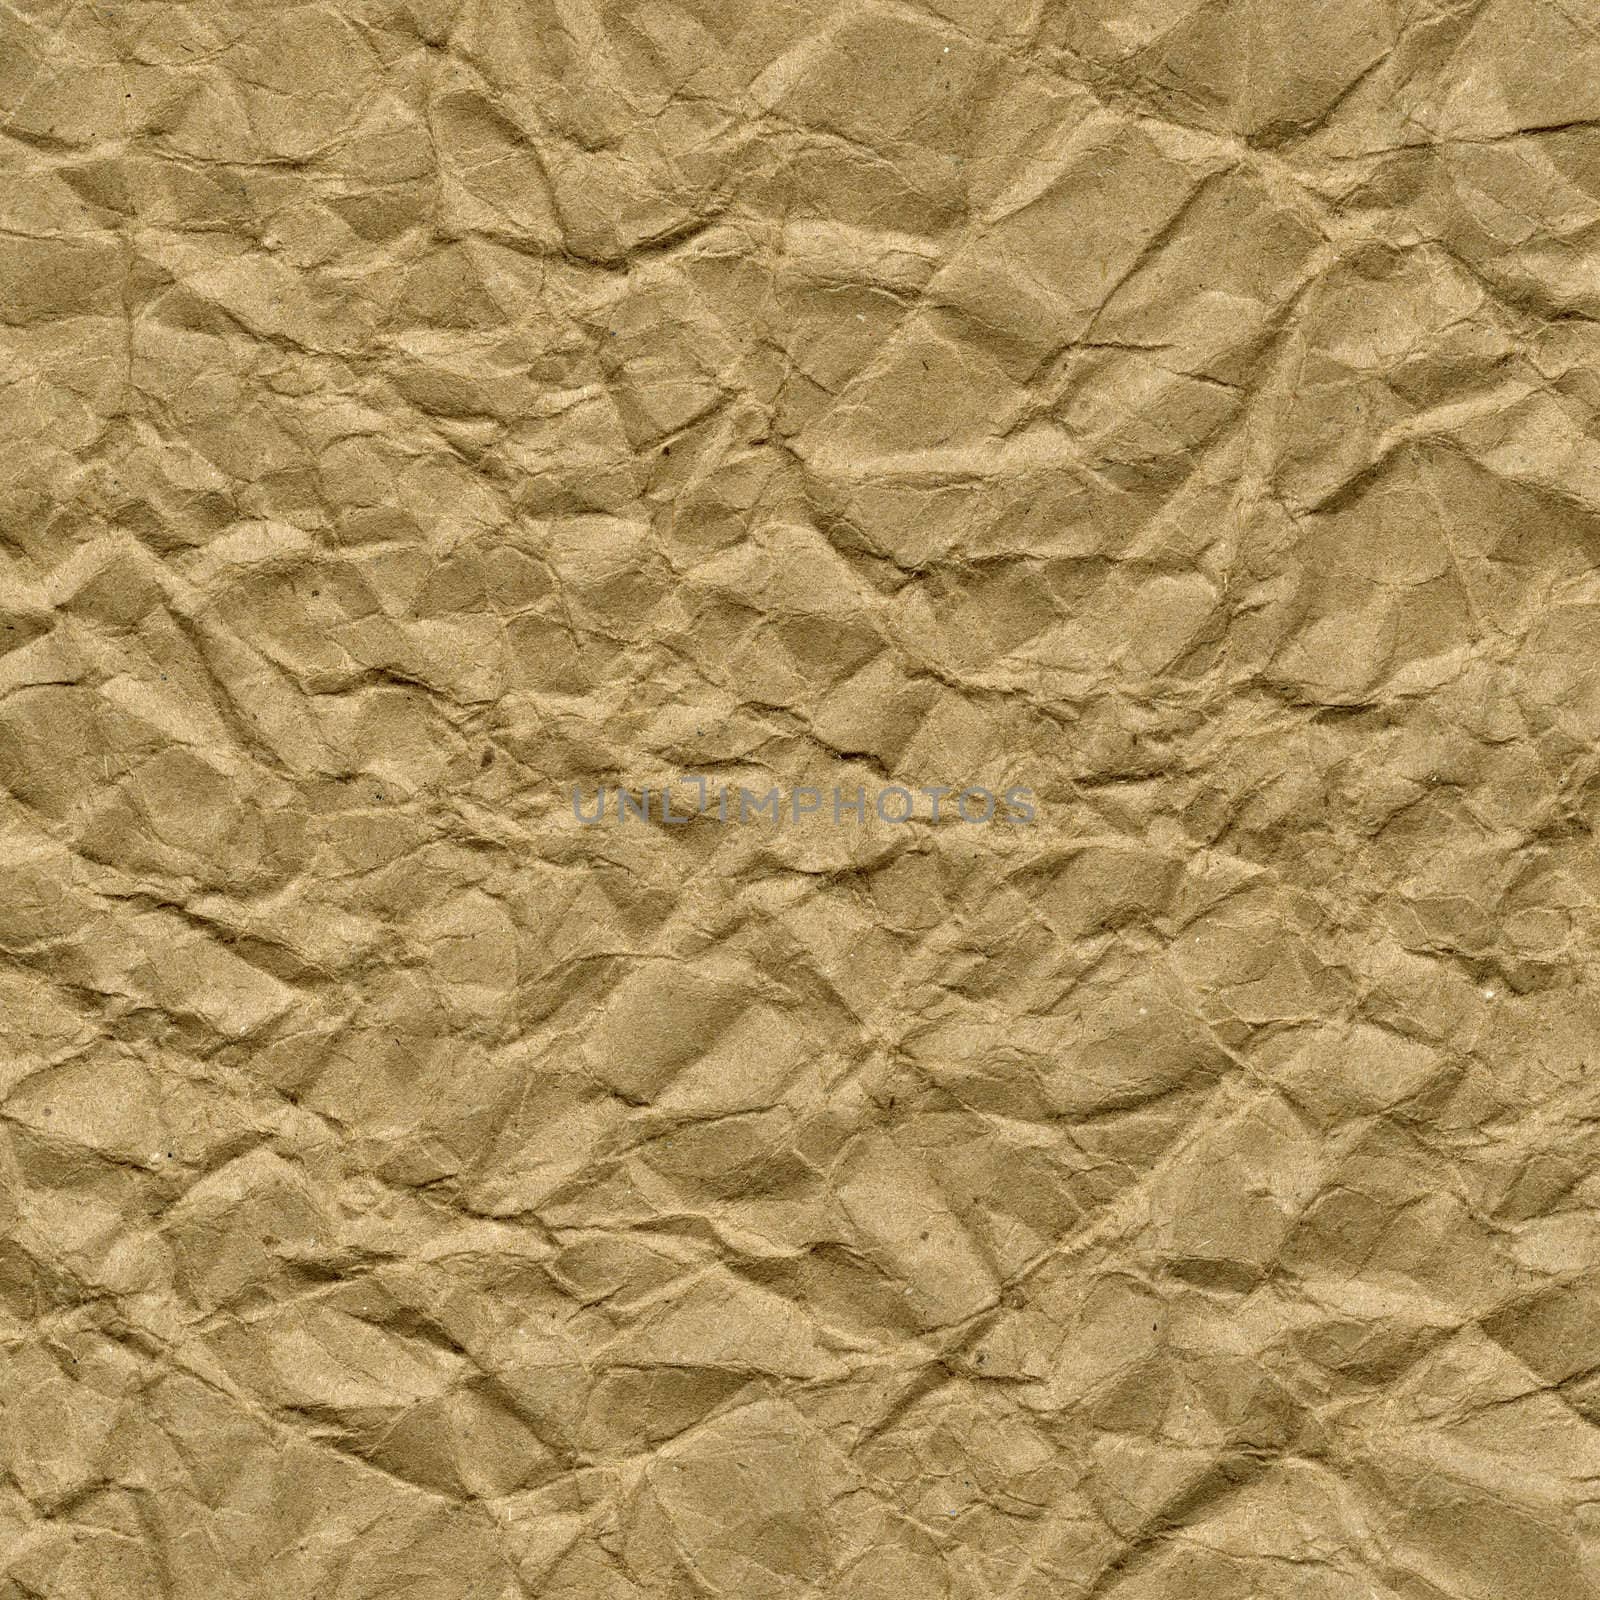 crumpled, wrinkled and creased brown packing paper background